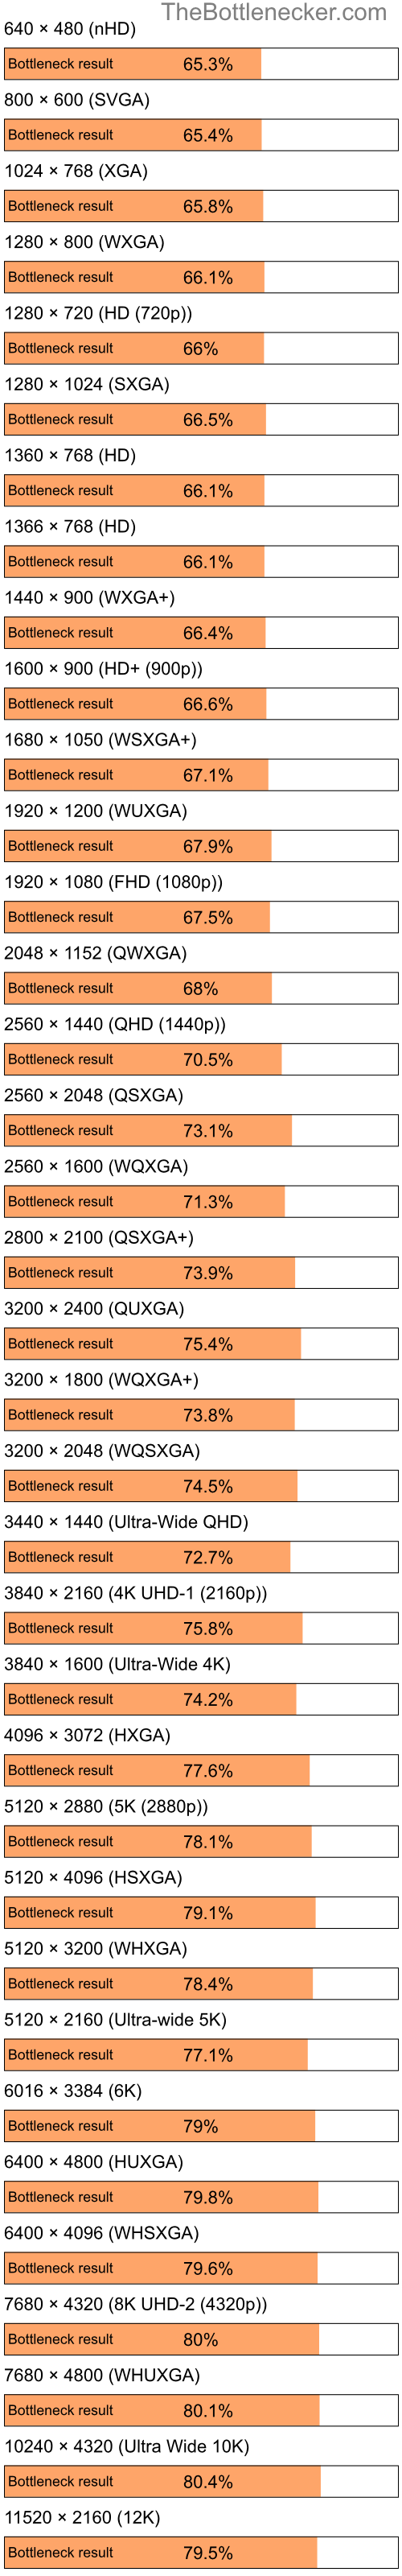 Bottleneck results by resolution for Intel Celeron and AMD Mobility Radeon HD 3450 in7 Days to Die